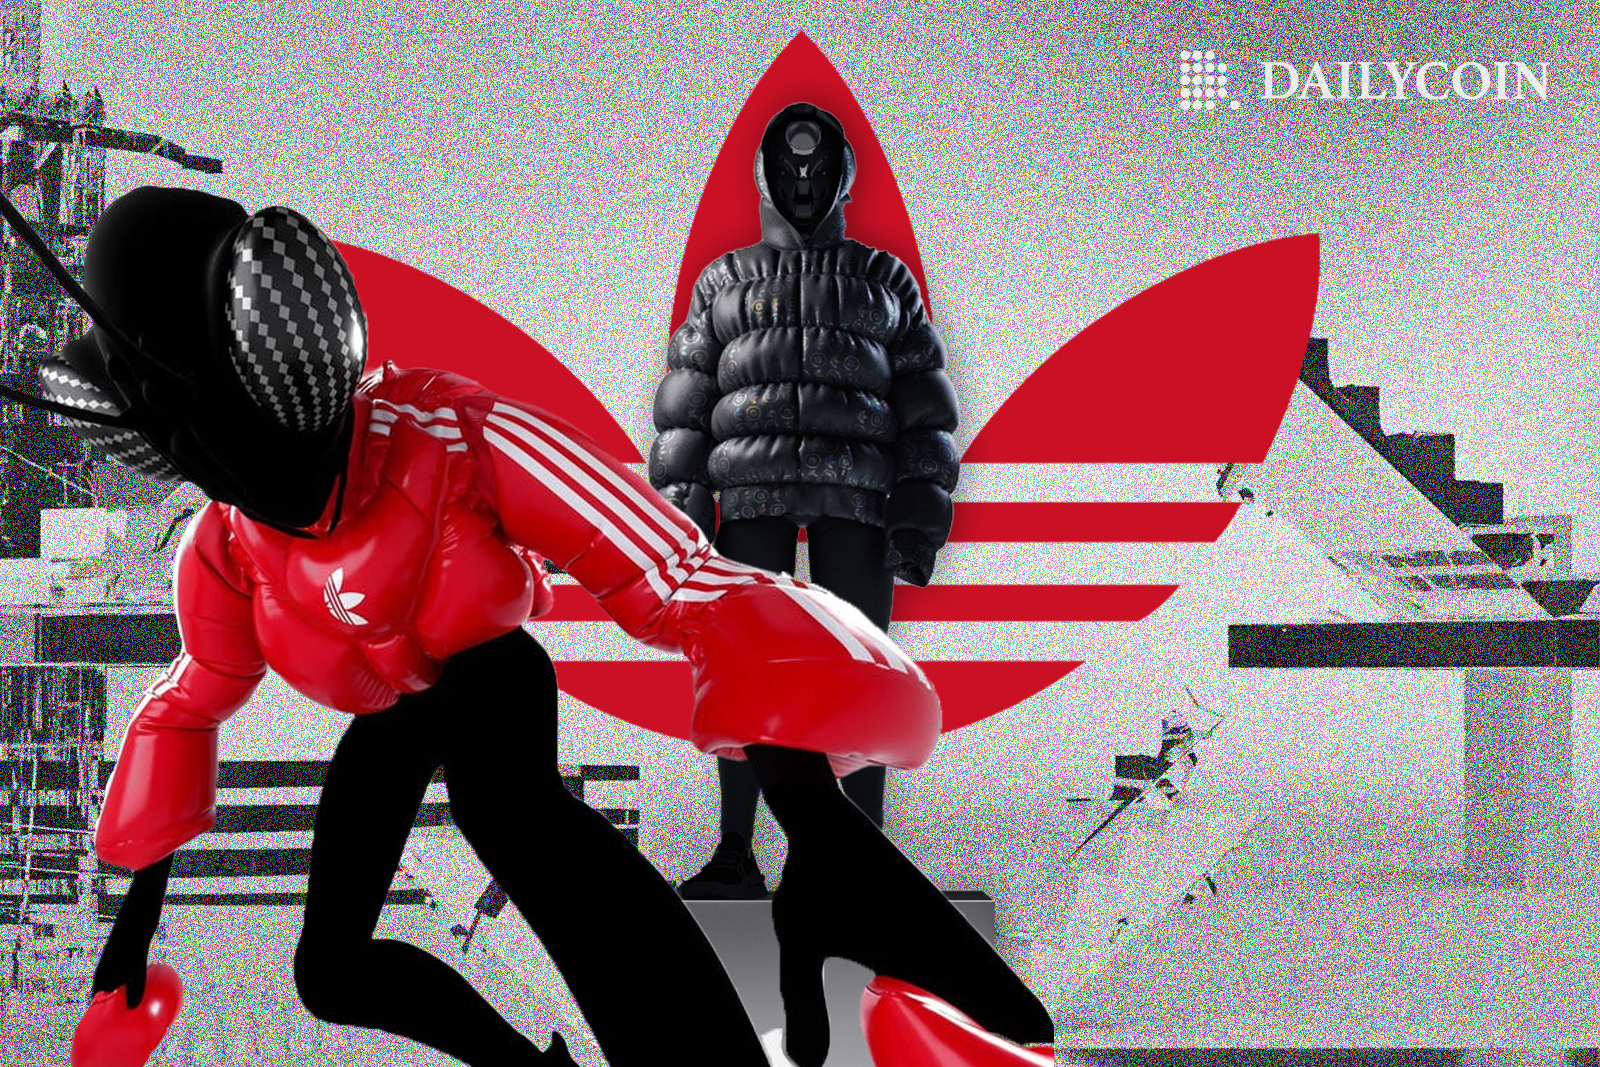 Adidas Kicks-off With Its First Digital Wearables Collection